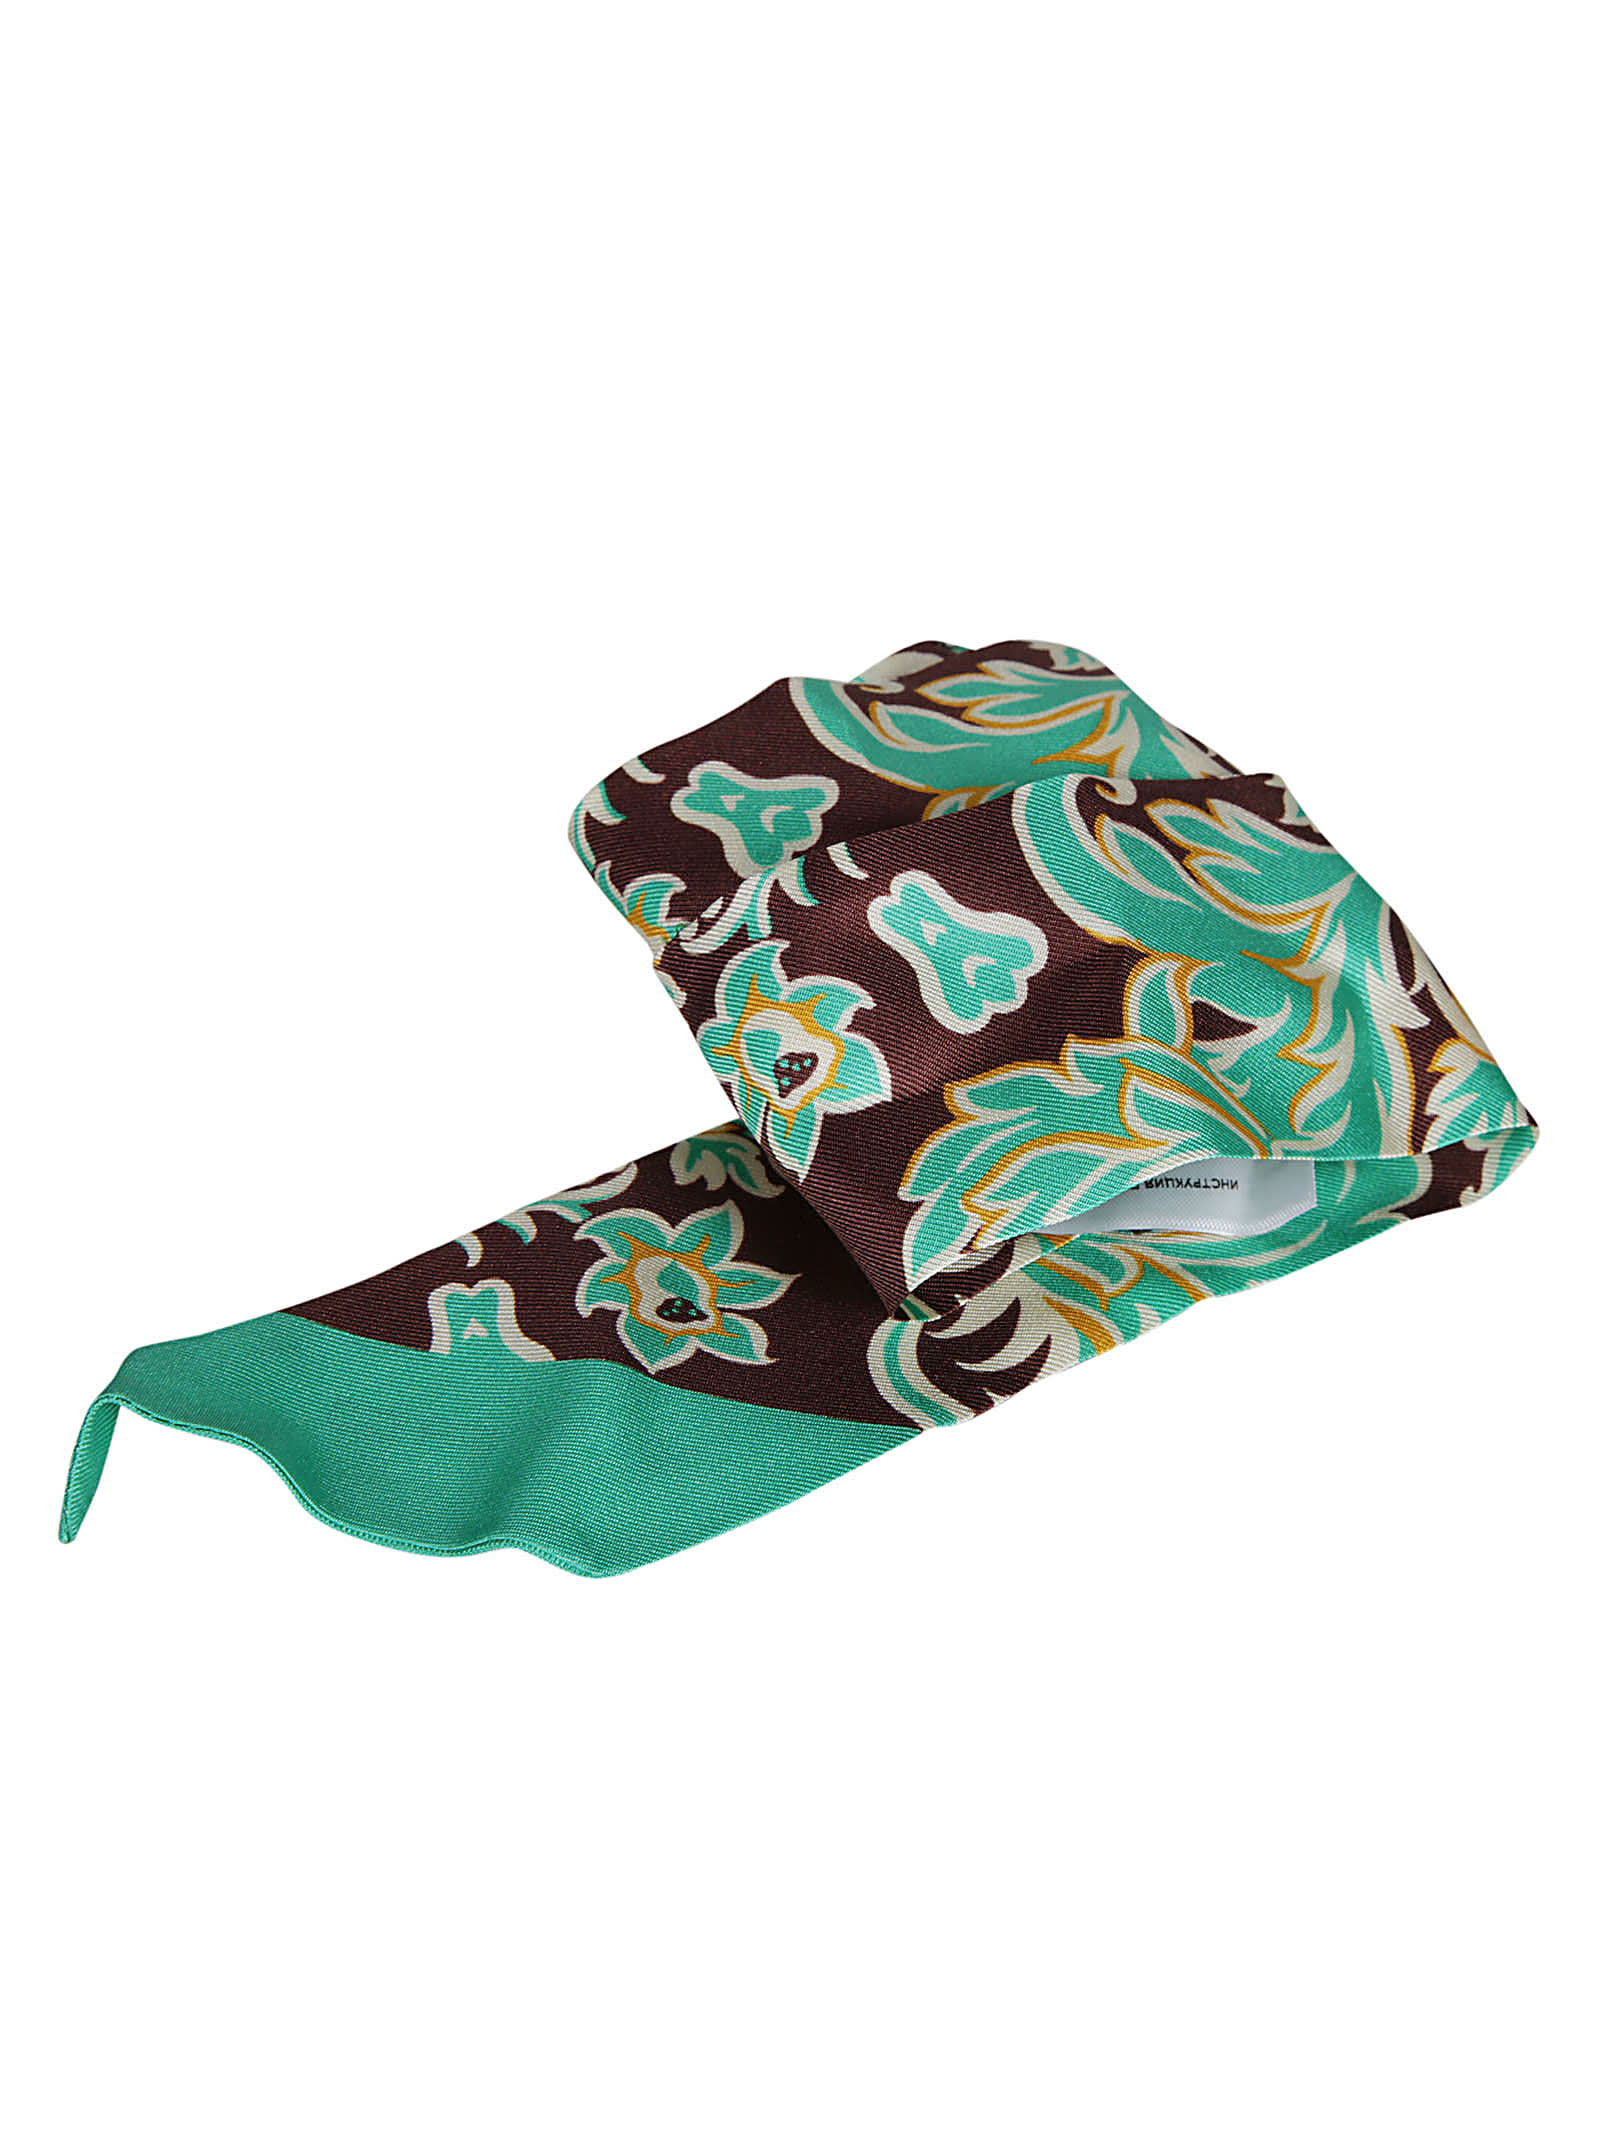 Etro Logo Floral Scarf In Green/brown